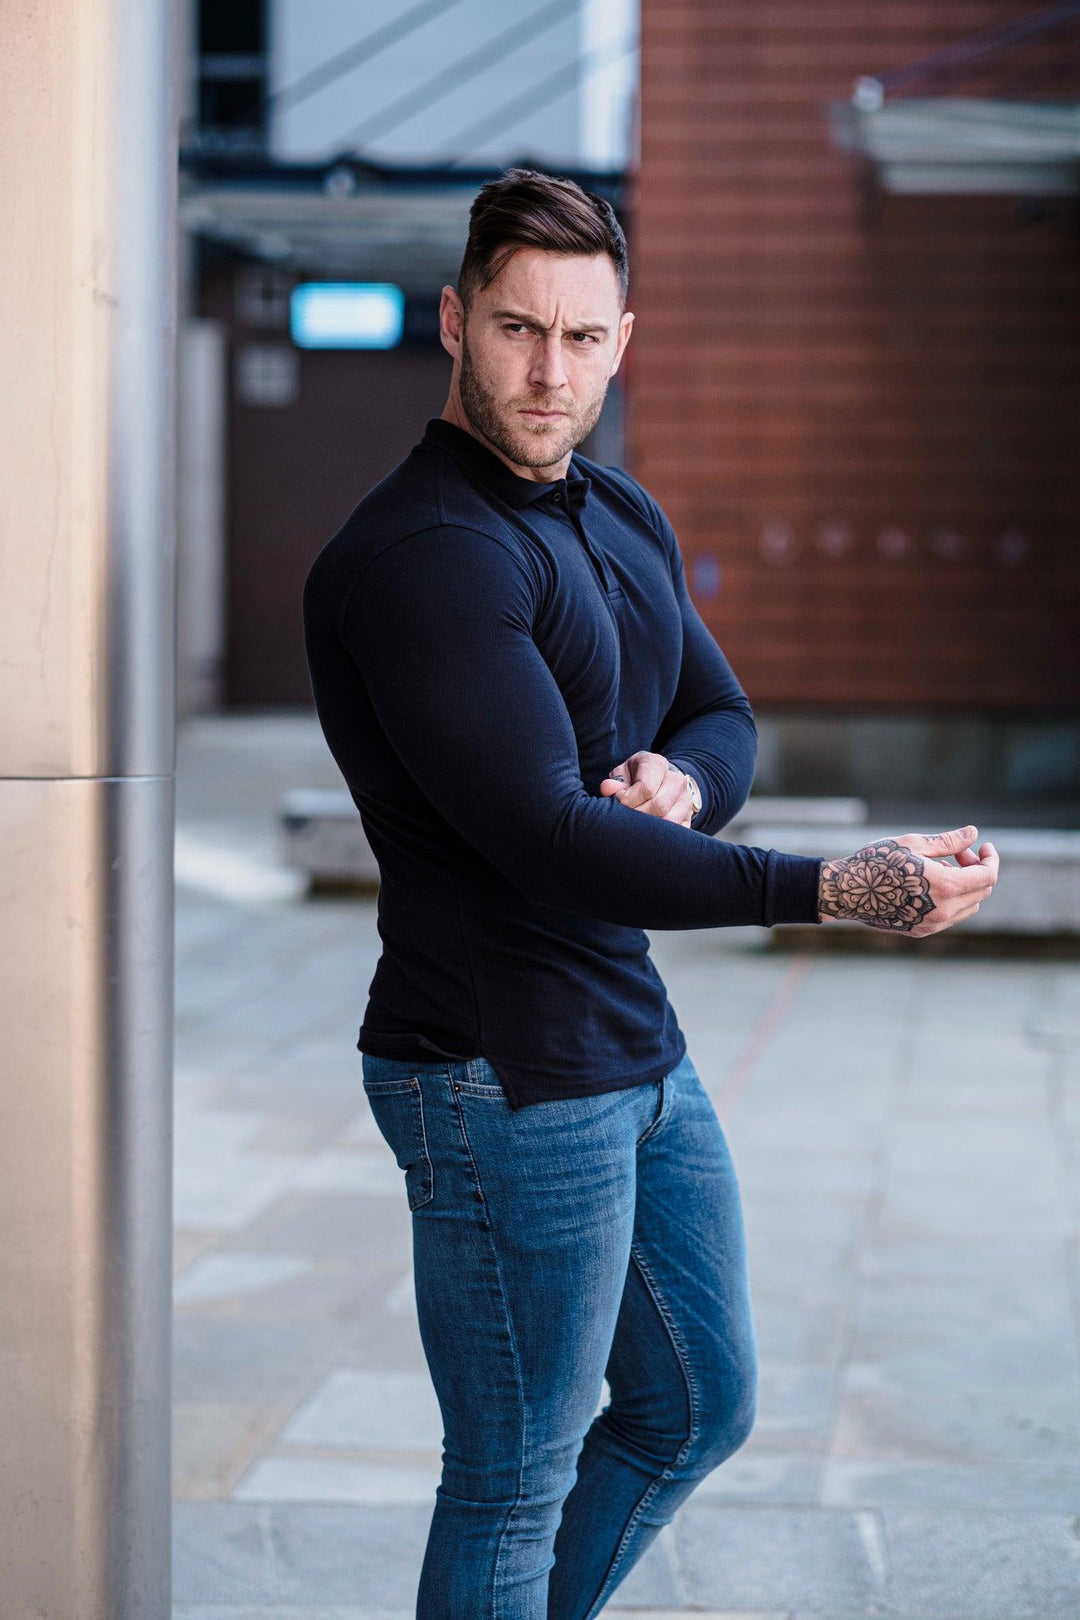 Navy Muscle Fit Polo. A Proportionally Fitted and Muscle Fit Polo Shirt. Ideal for muscular guys.